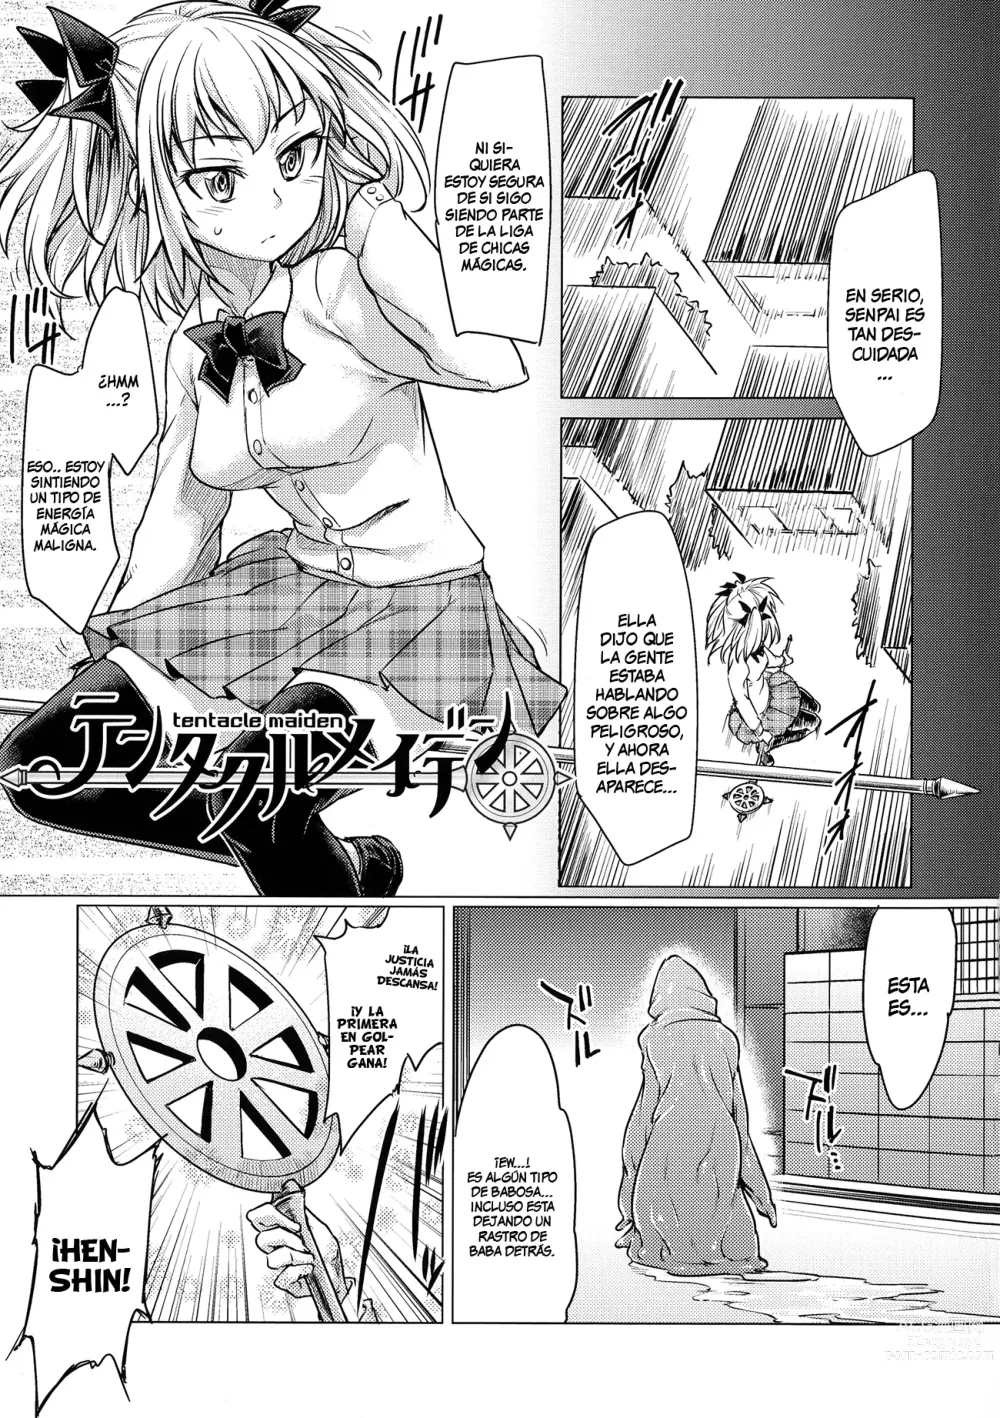 Page 1 of manga Tentacle Maiden